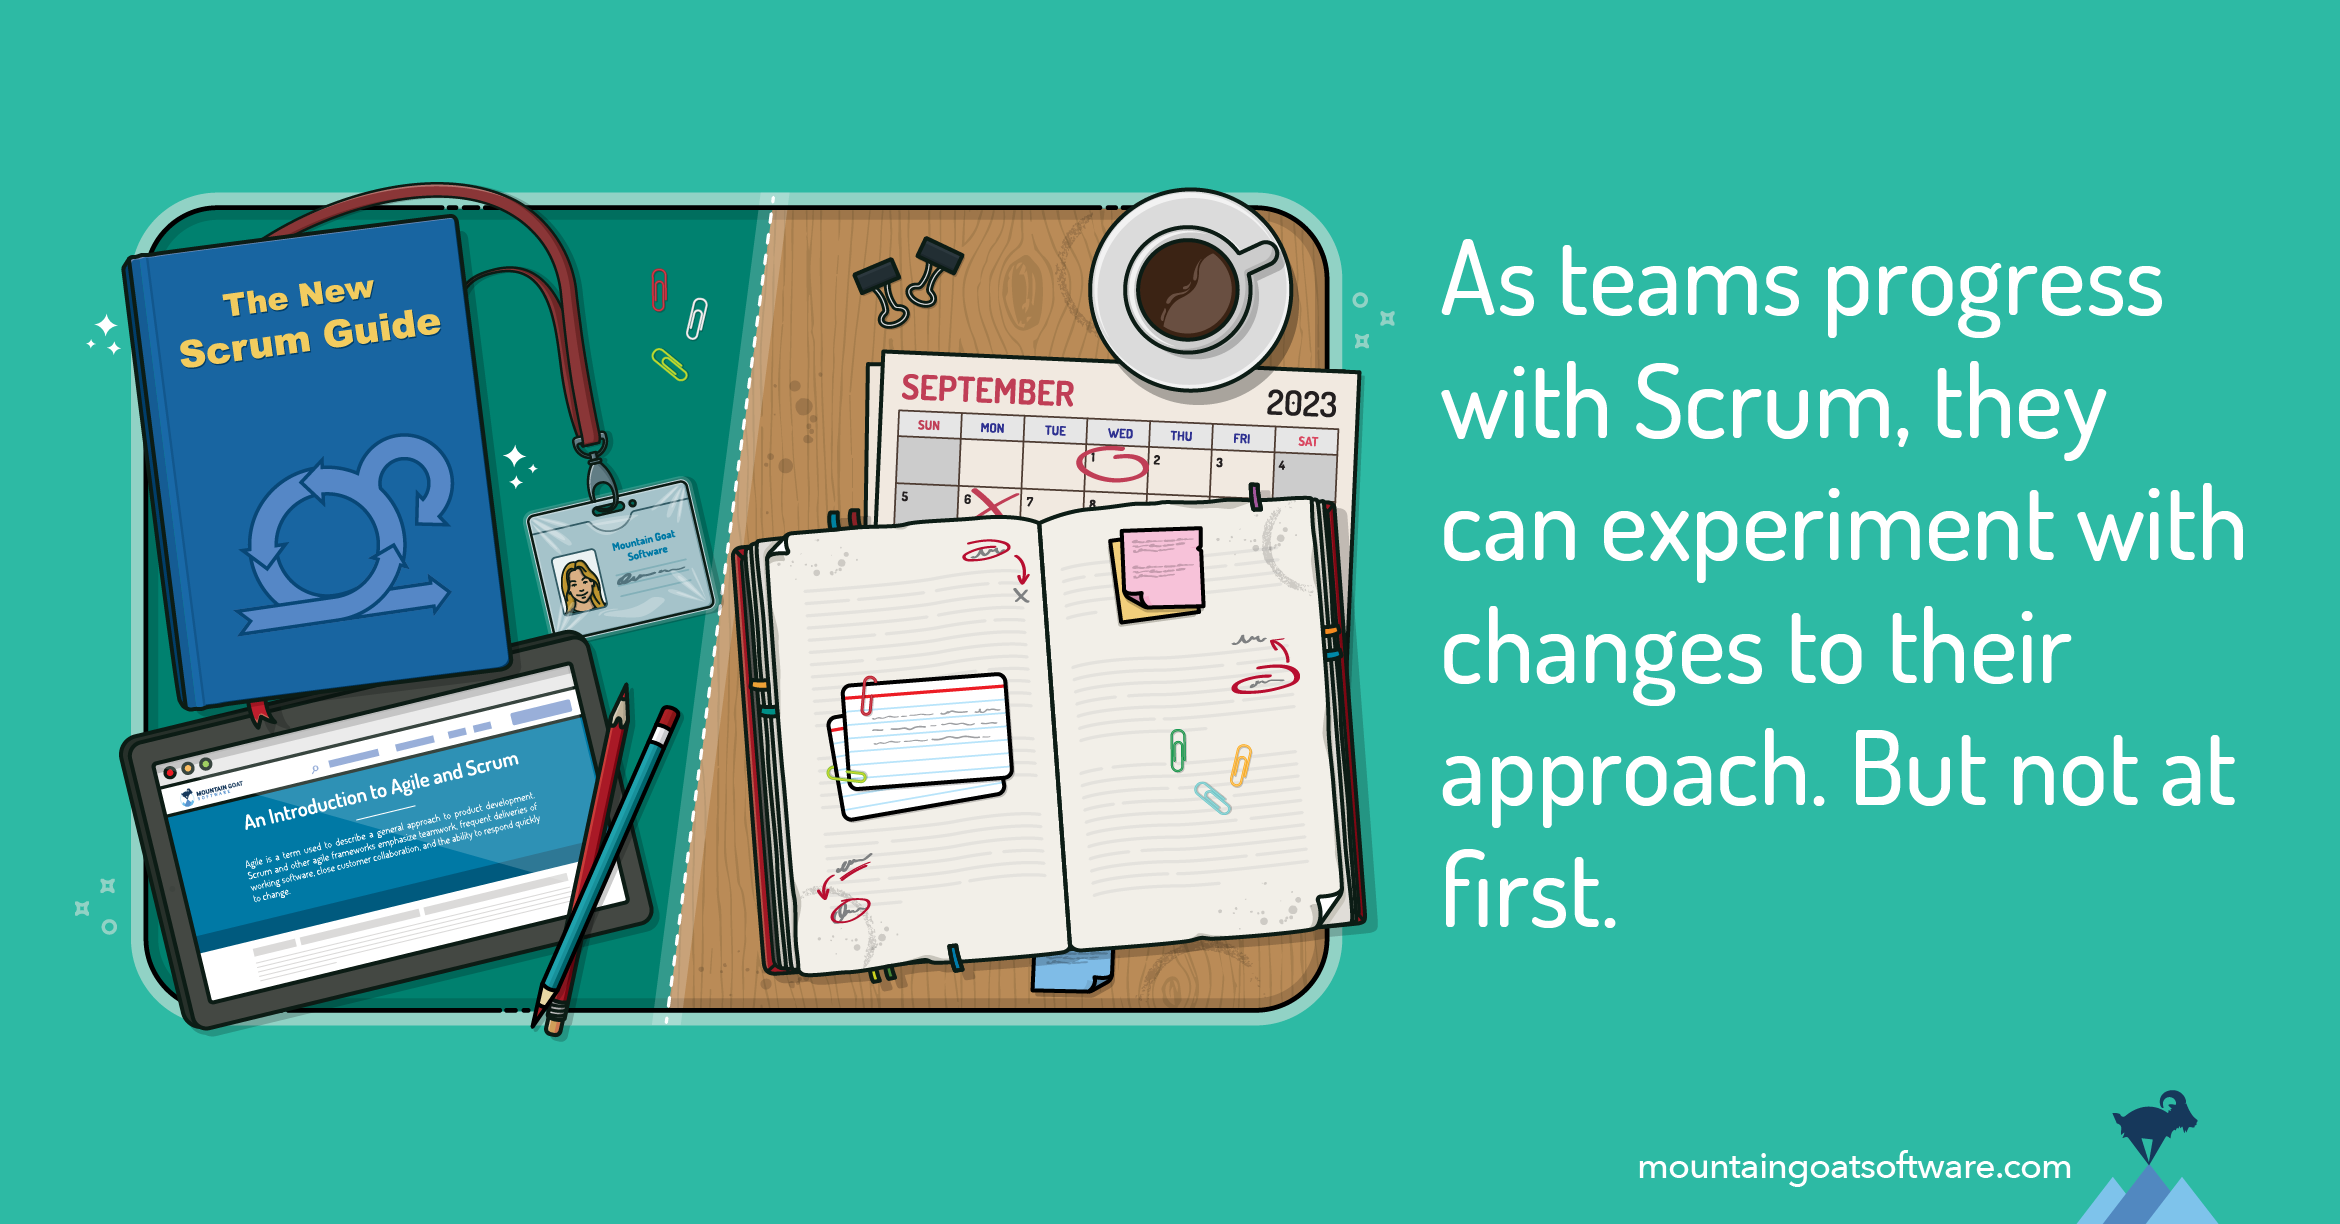 Start Scrum by the Book: Don’t Finish There